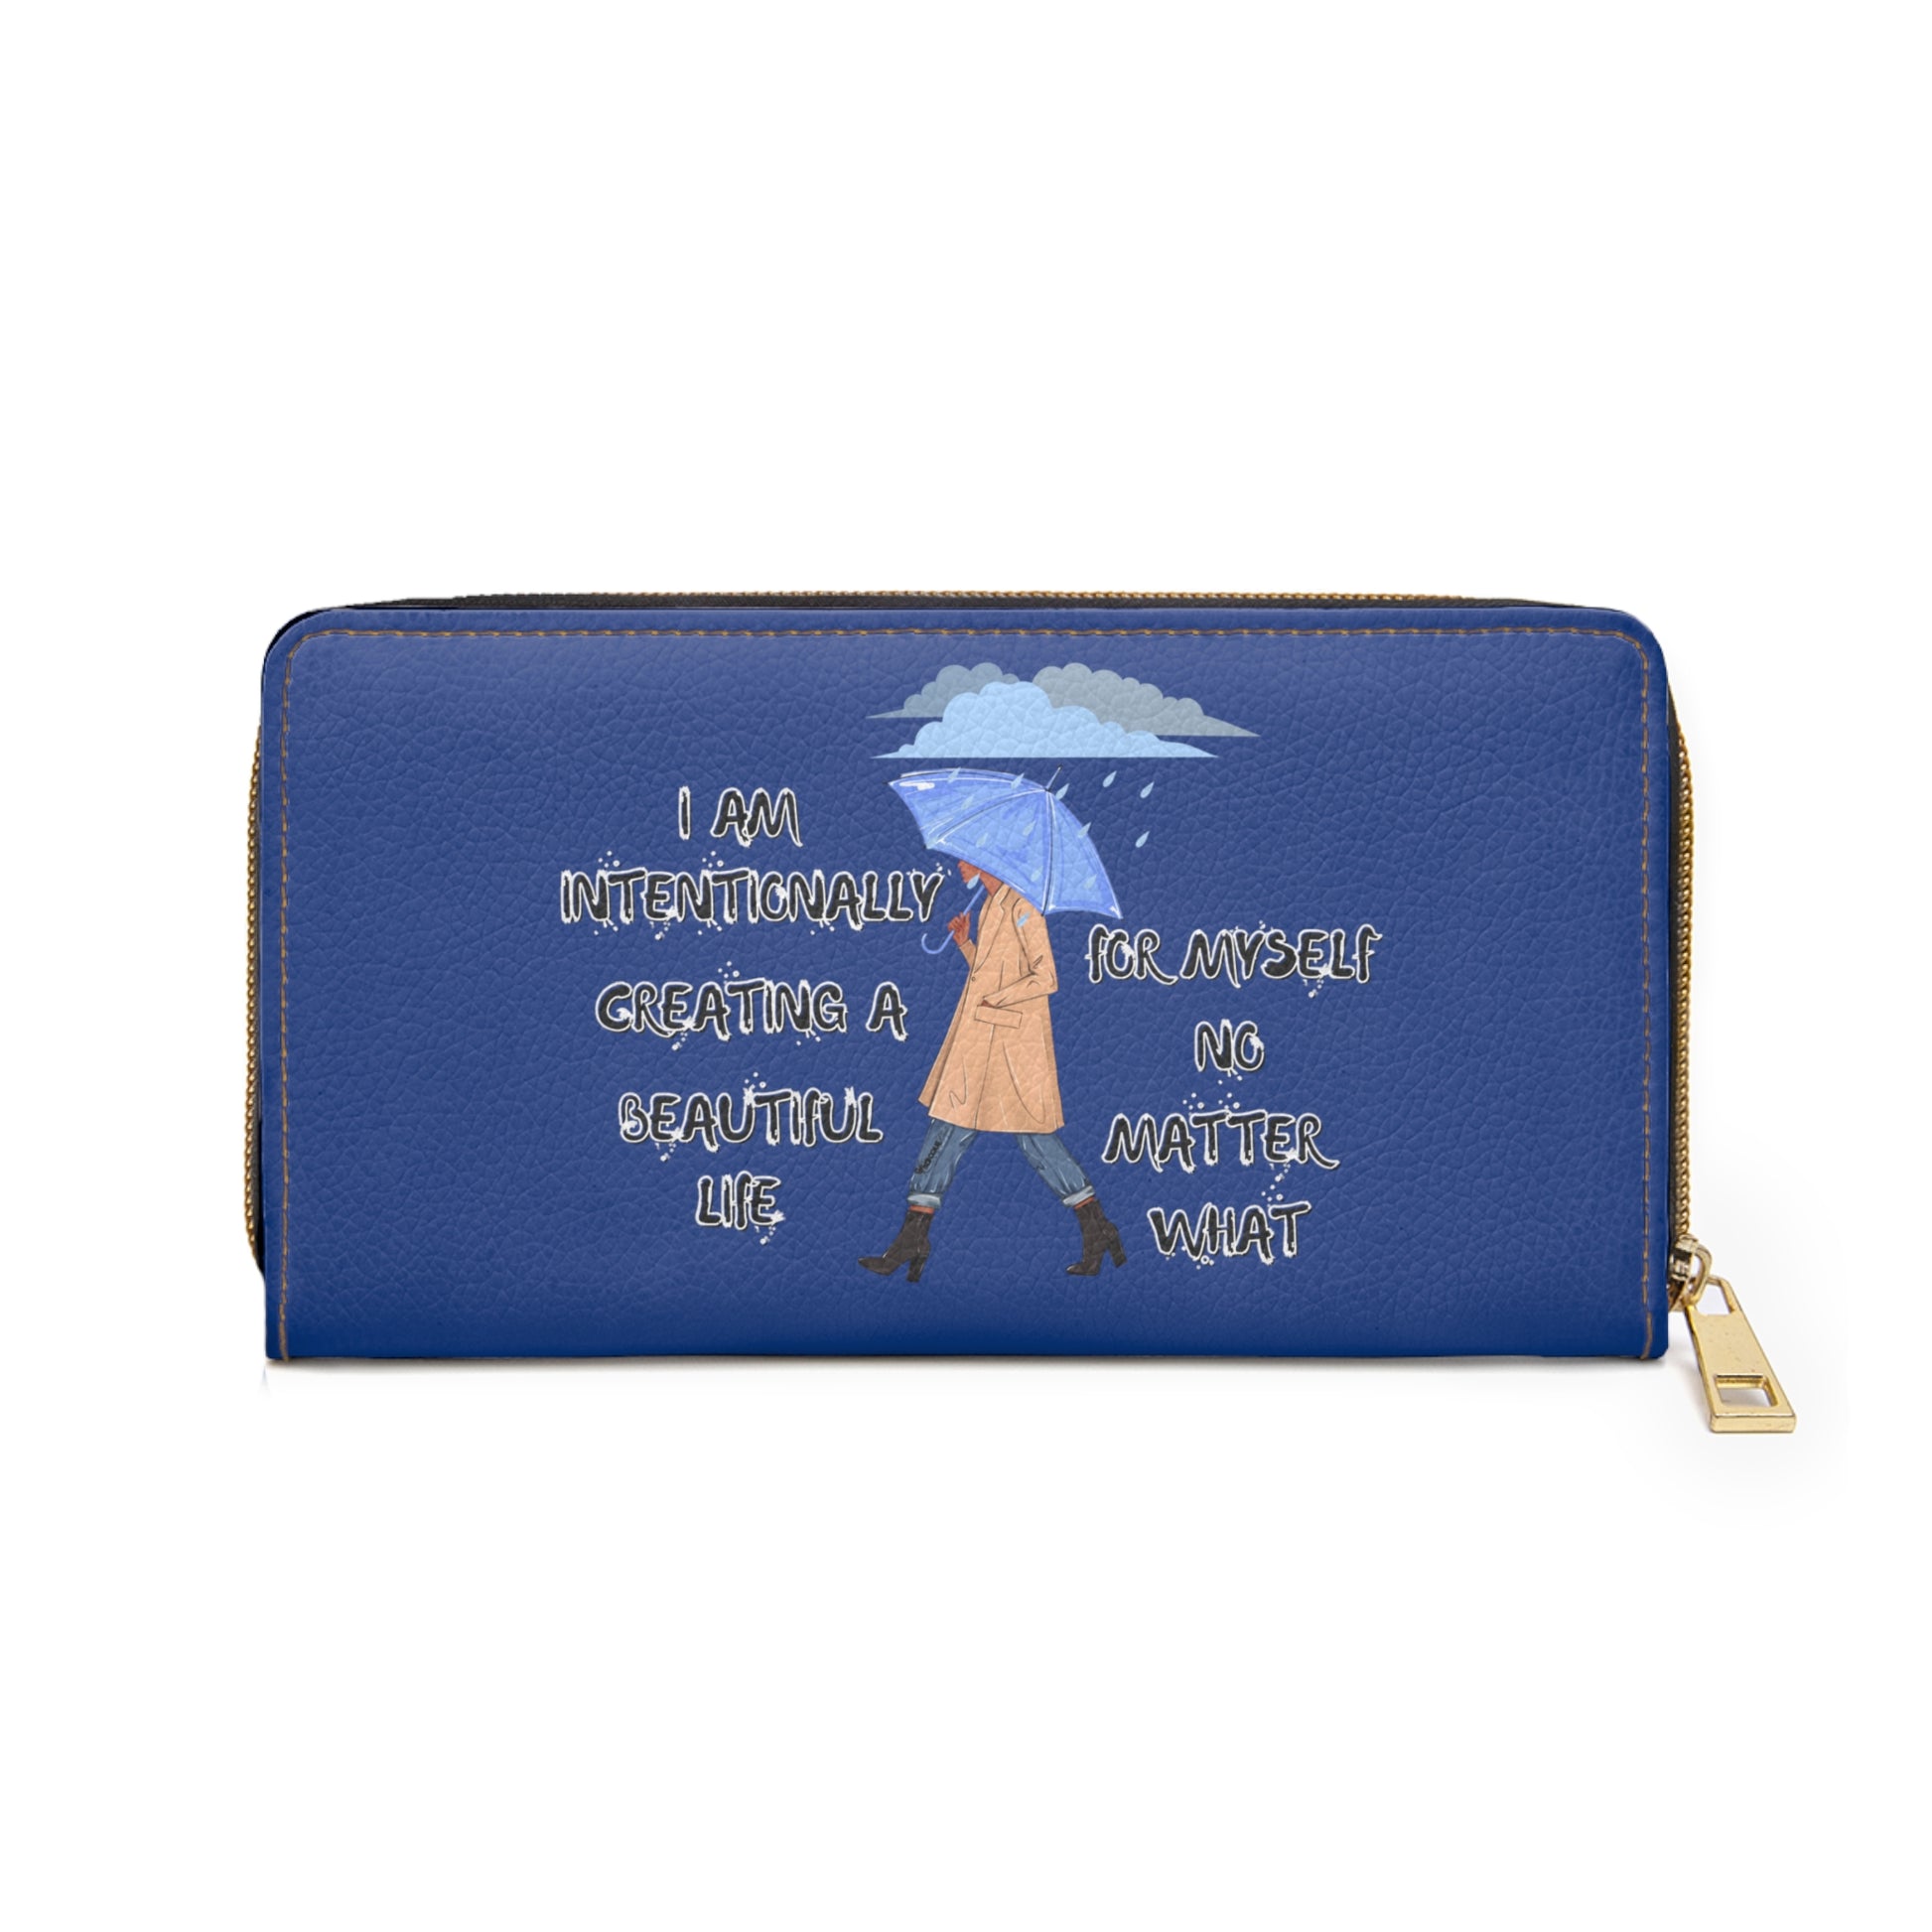 "I AM Intentionally Creating A Beautiful Life"- Positive Afrocentric Affirmation Vegan Leather Wallet Bag- Empower Your Style and Self-Love' ; Blue Wallet